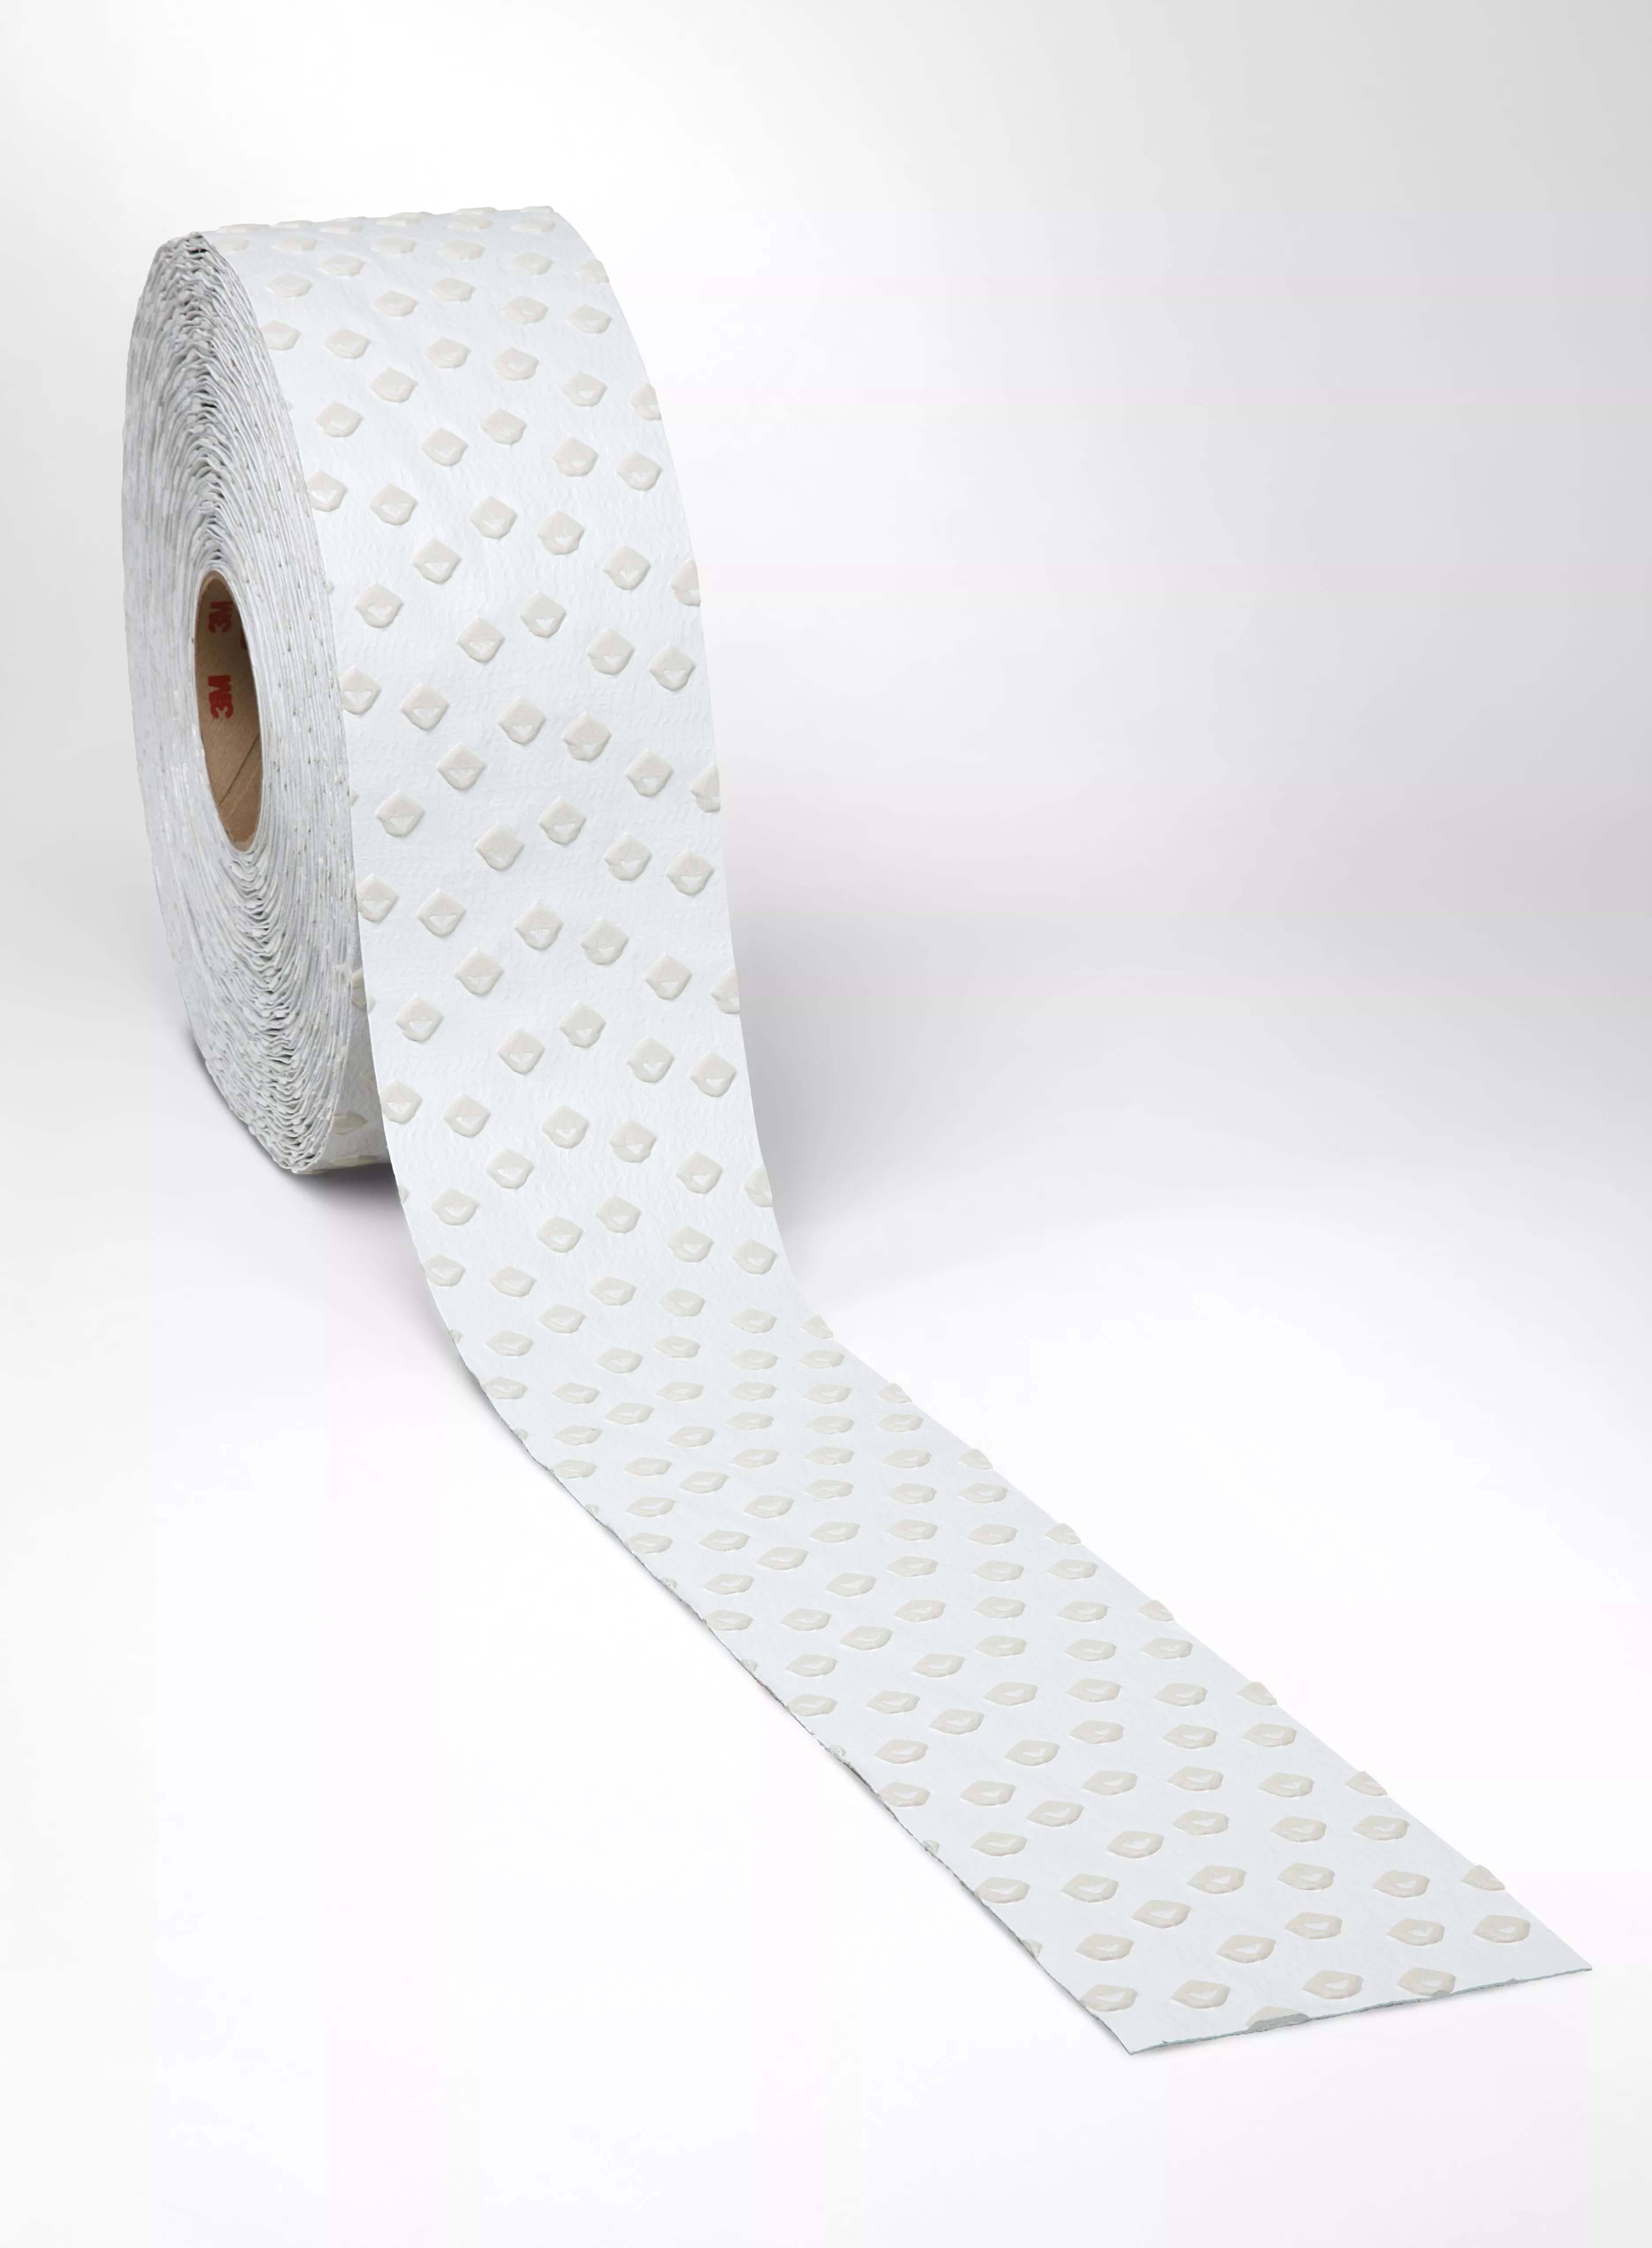 3M™ Stamark™ Removable Pavement Marking Tape A710, White, IL only, 6 in
x 120 yd